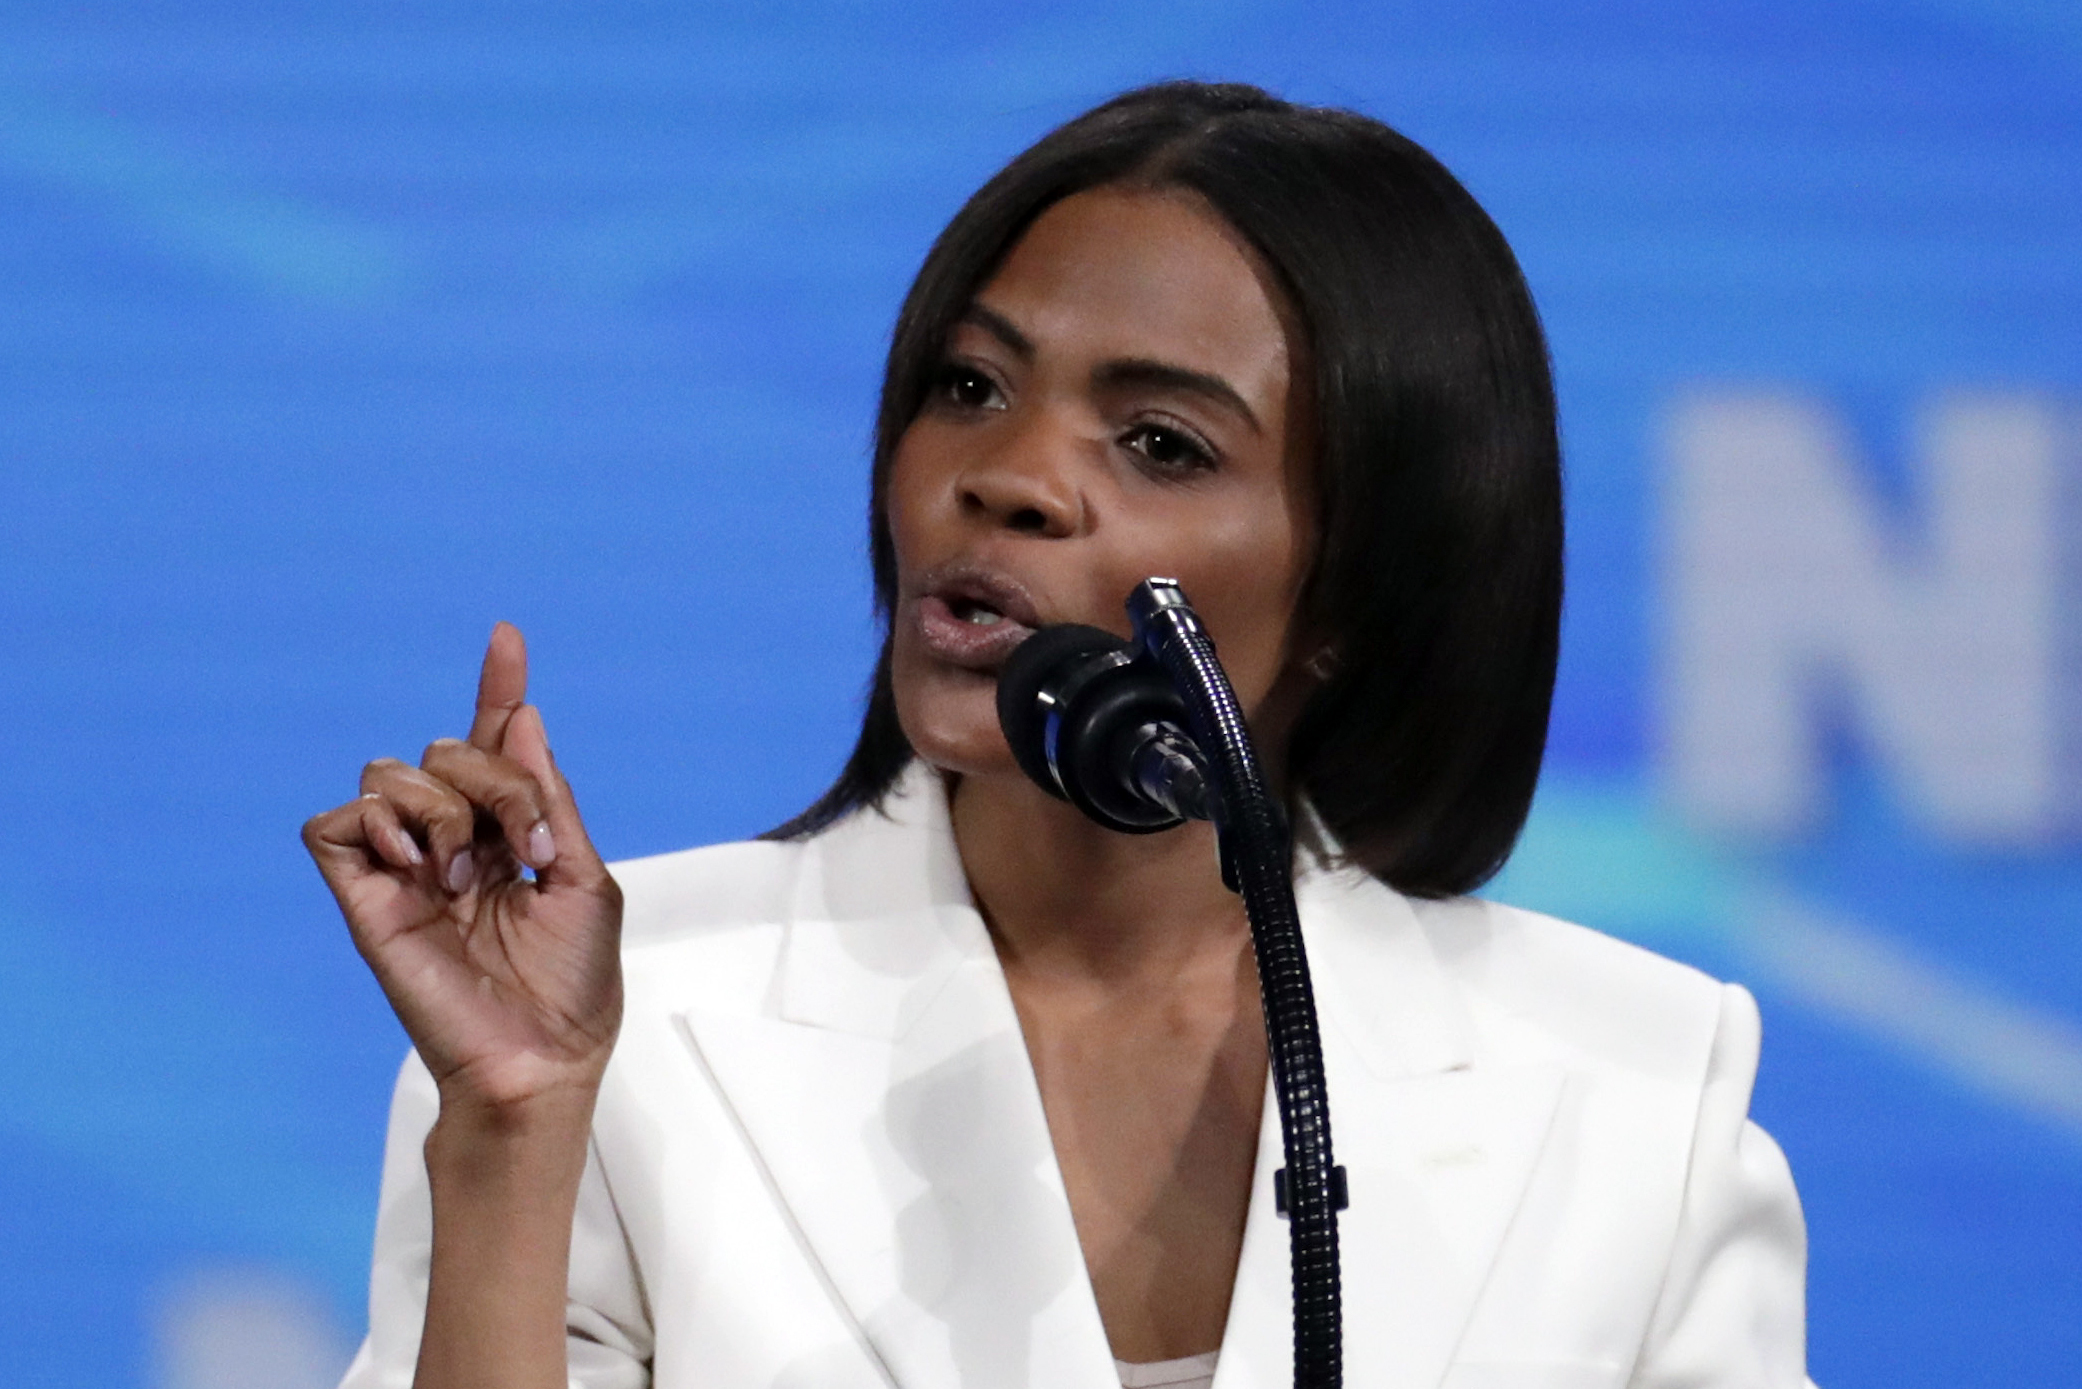 Reporter Posts Private Email From Candace Owens Threatening Him With Sexual Innuendo Over Negative Story (mediaite.com)